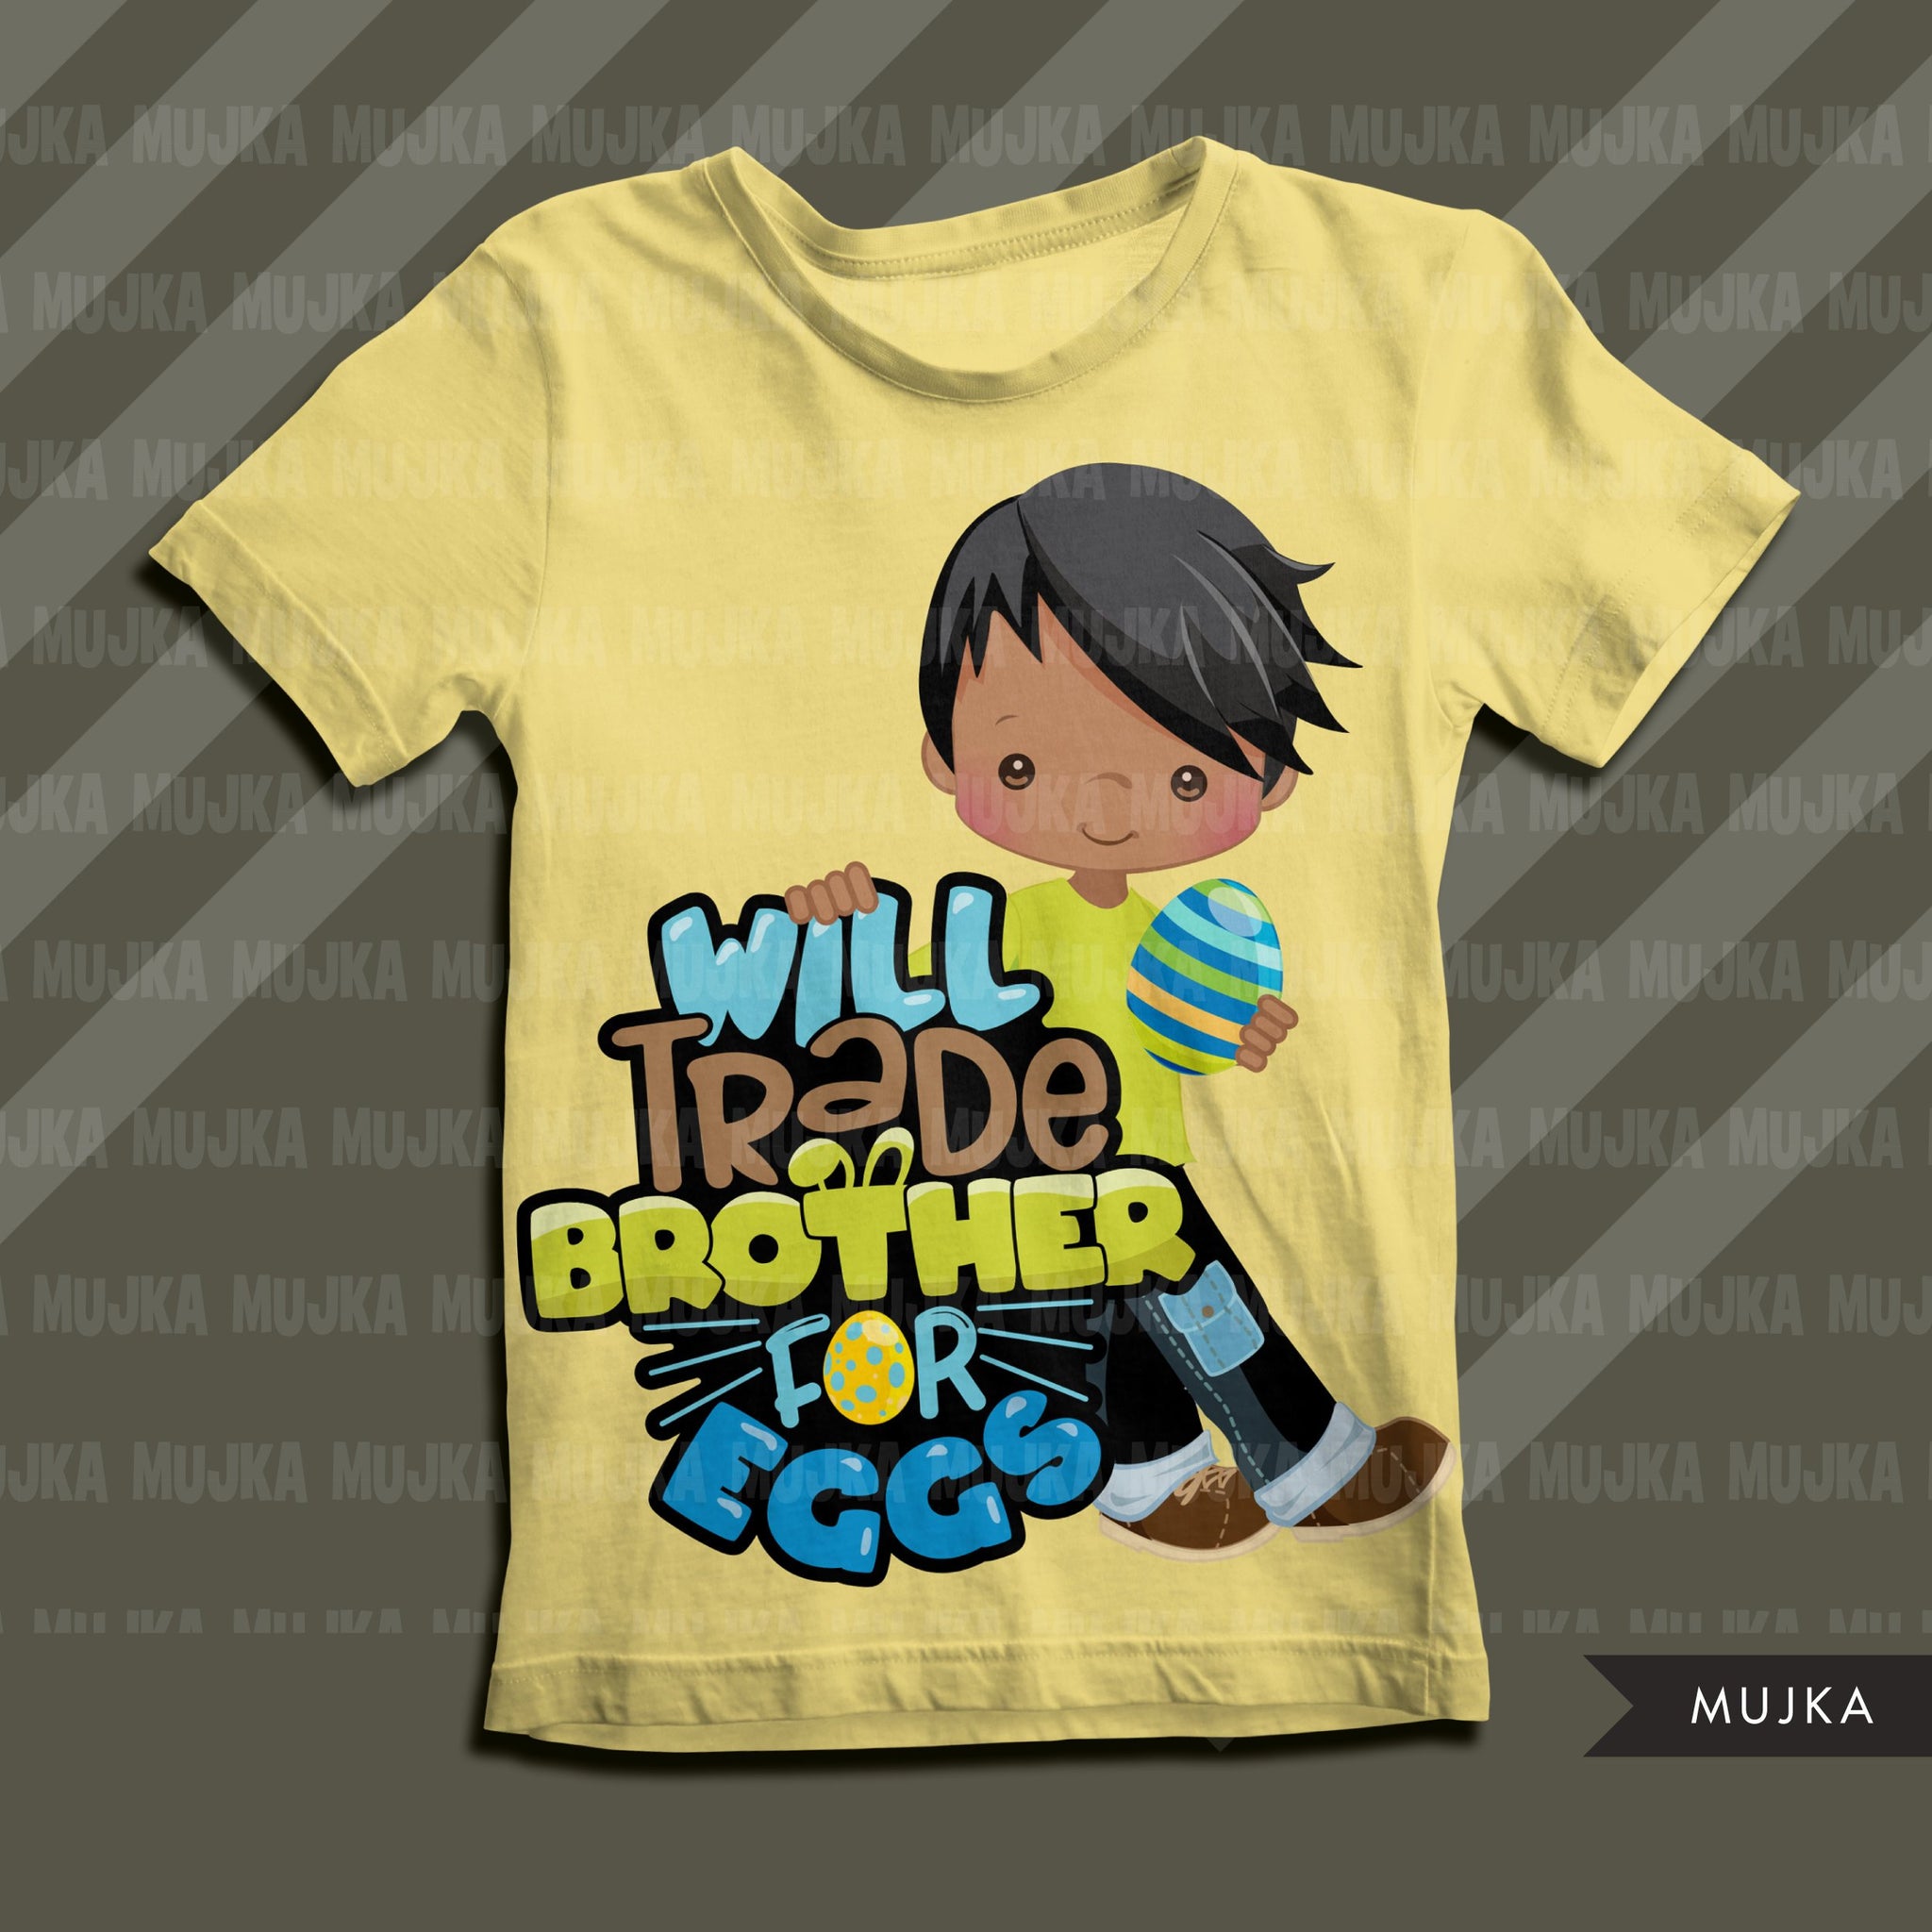 Easter PNG digital, Will trade brother for eggs Printable HTV sublimation image transfer clipart, t-shirt boy graphics